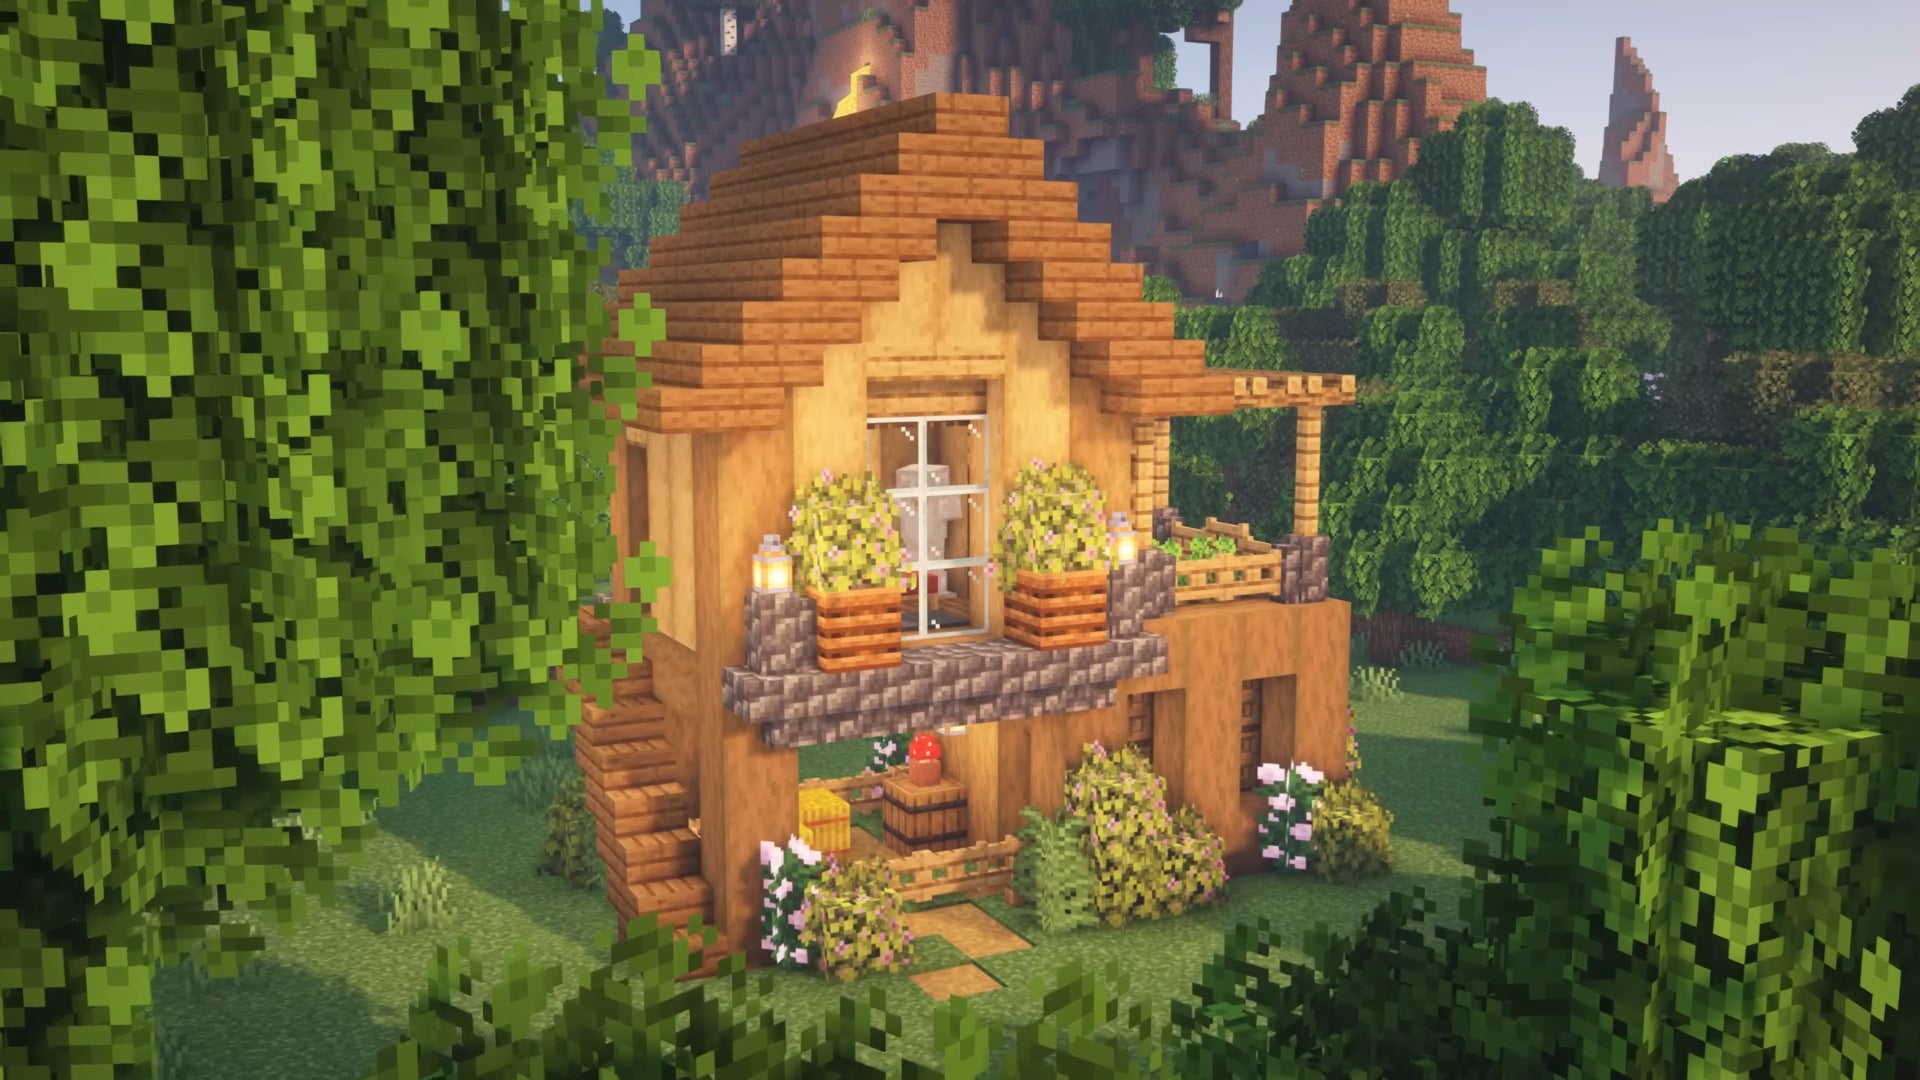 A starter house in Minecraft, built by YouTuber Zaypixel.